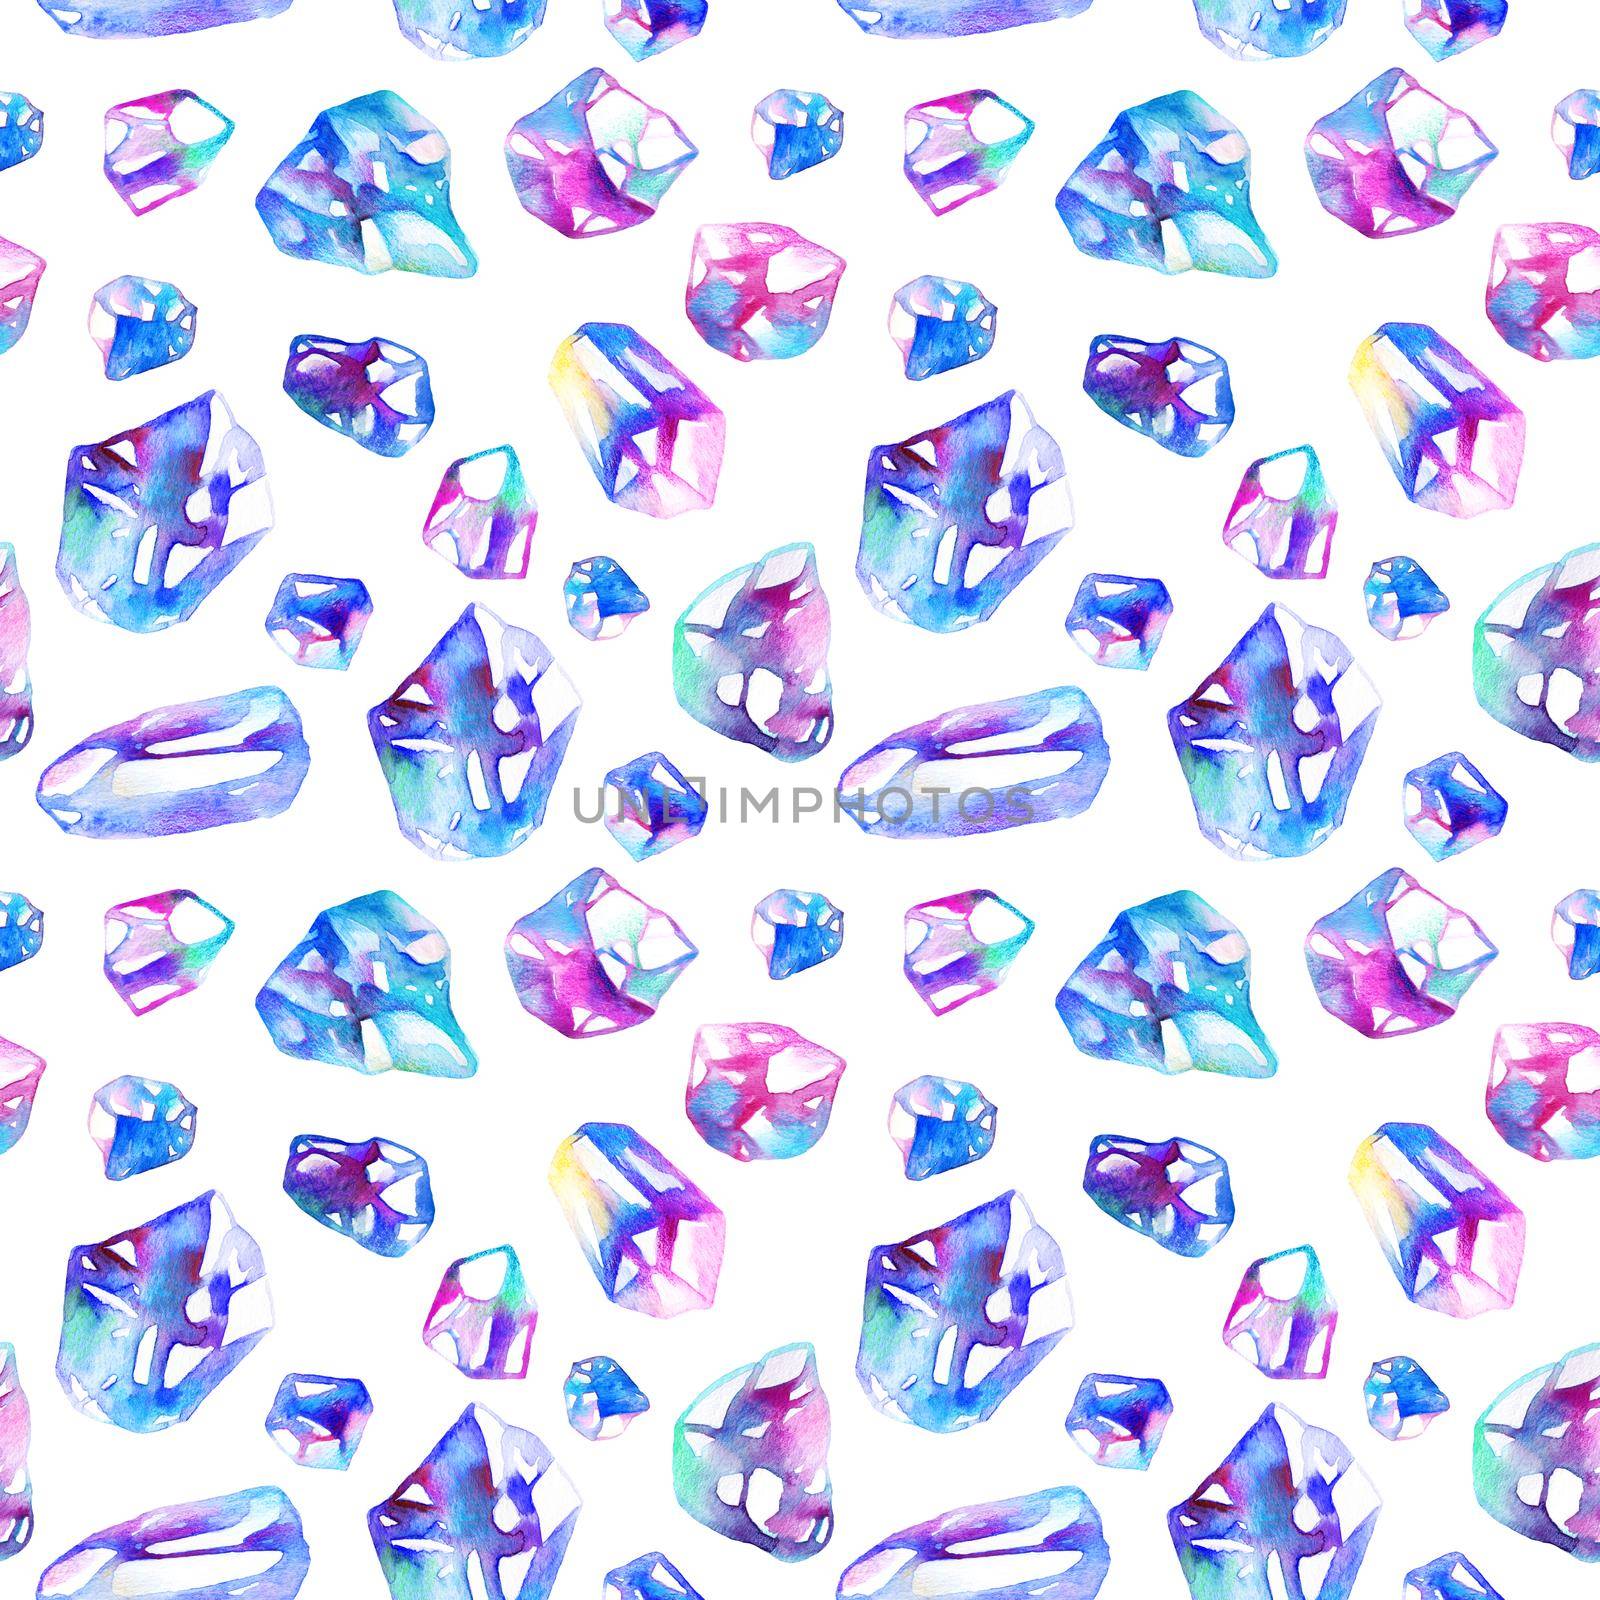 Hand drawn diamond crystals - seamless pattern design with decorative watercolor drawings on white background